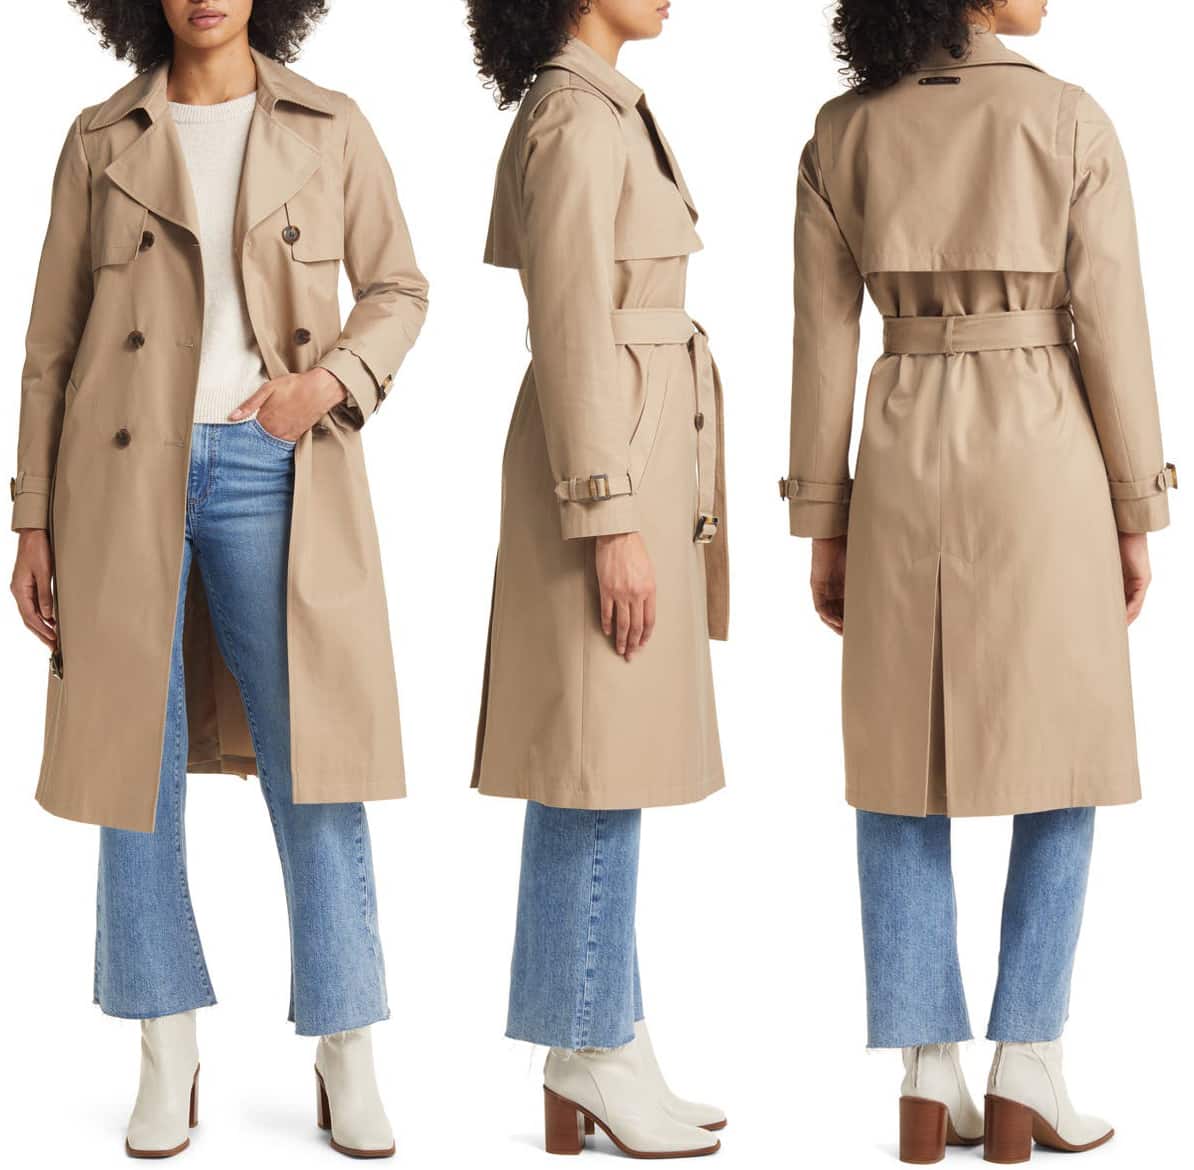 Timeless elegance in a water-repellent trench coat featuring distinct notched lapels and a classic buckled belt